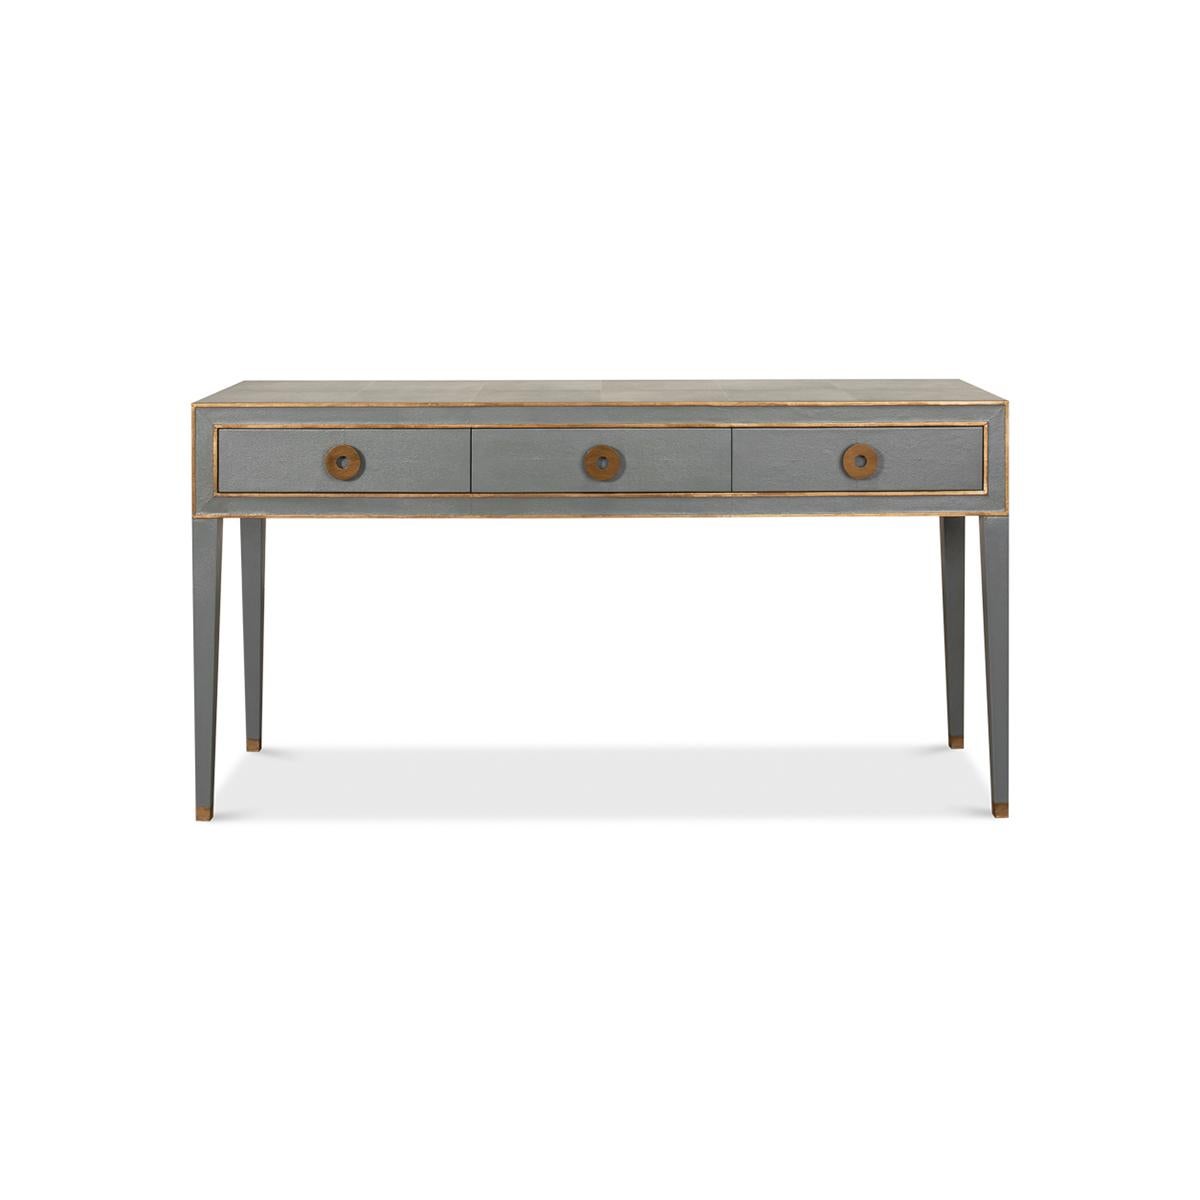 Mid-Century leather wrapped console, a grey embossed faux shagreen wrapped console with three drawers framed in gilt and raised on square tapered legs.

Dimensions: 64